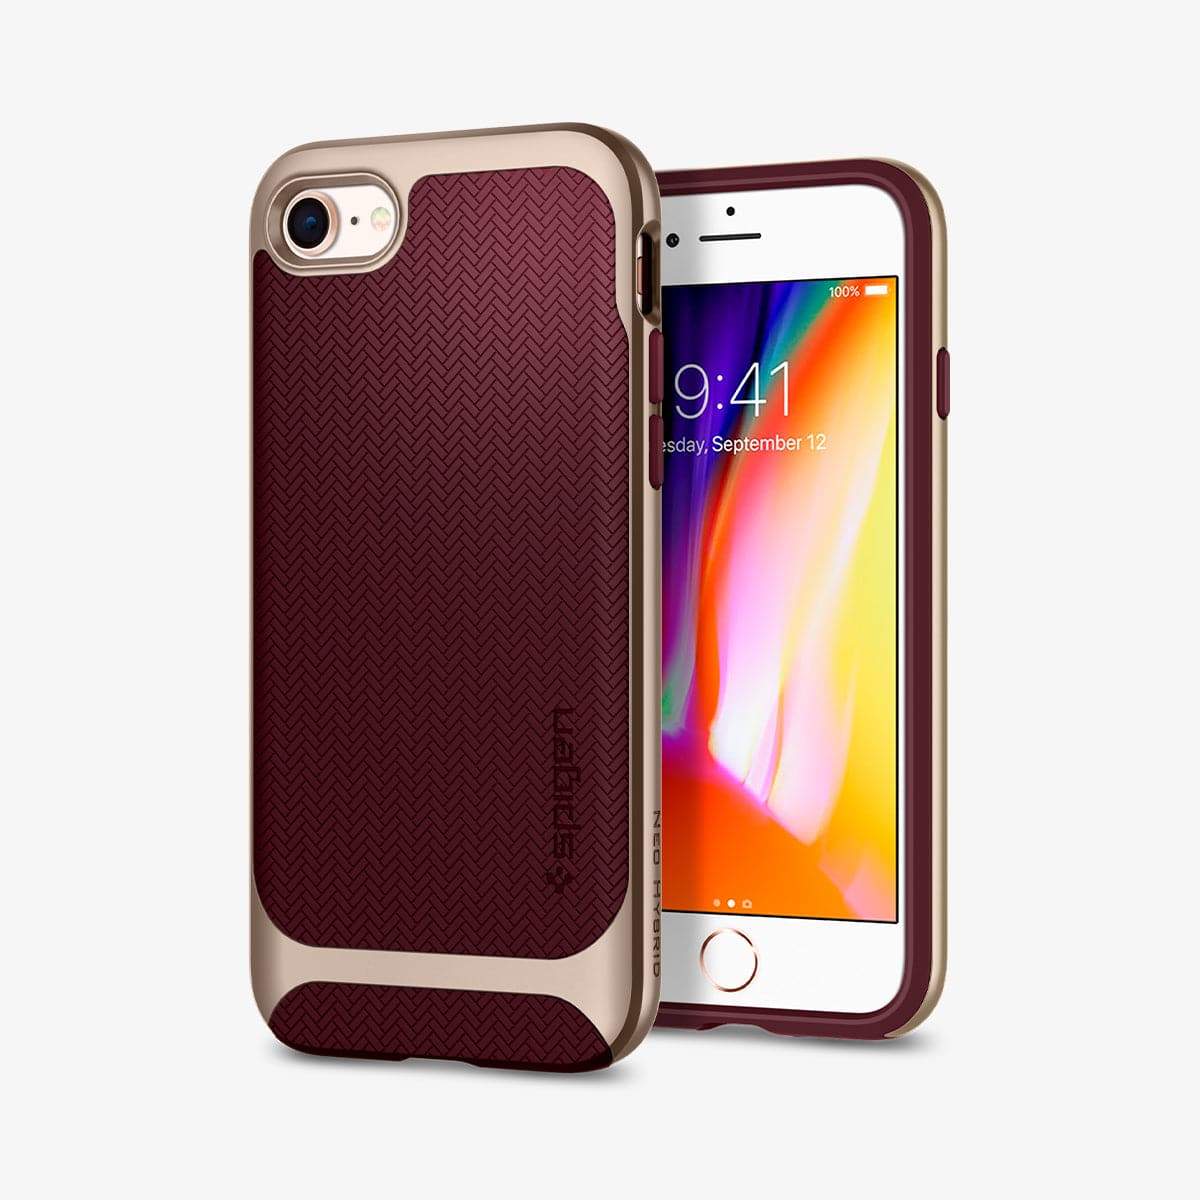 054CS22198 - iPhone 8 Series Neo Hybrid Herringbone Case in Burgundy showing the back and partial front